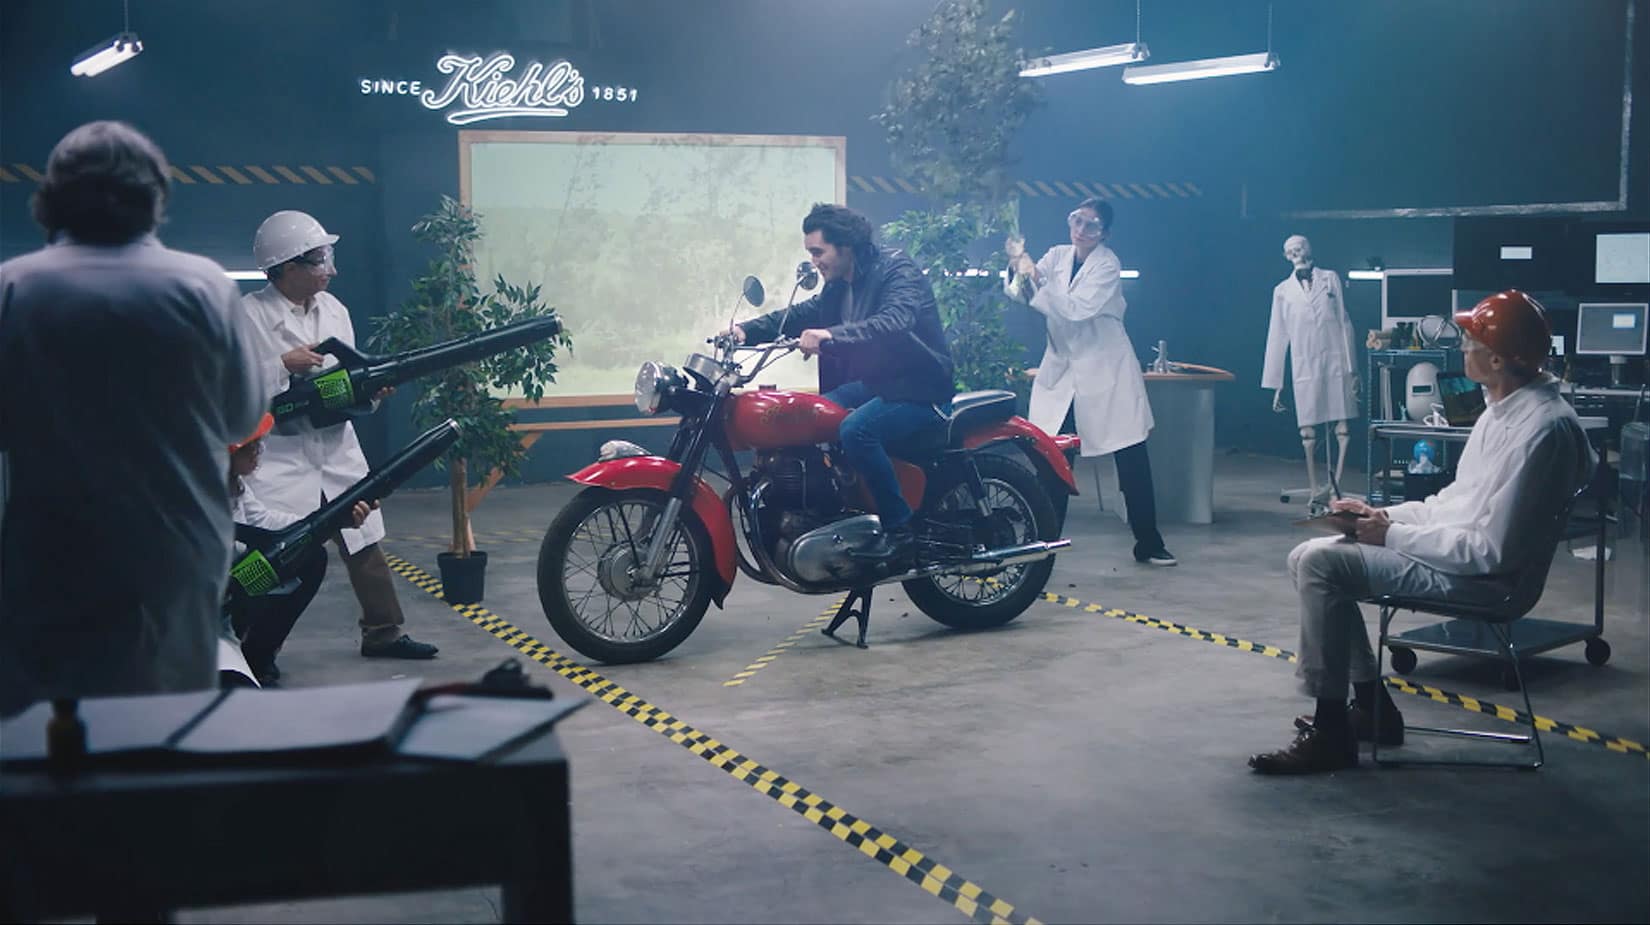 kiehls-ride-of-your-life-video-production-thumb